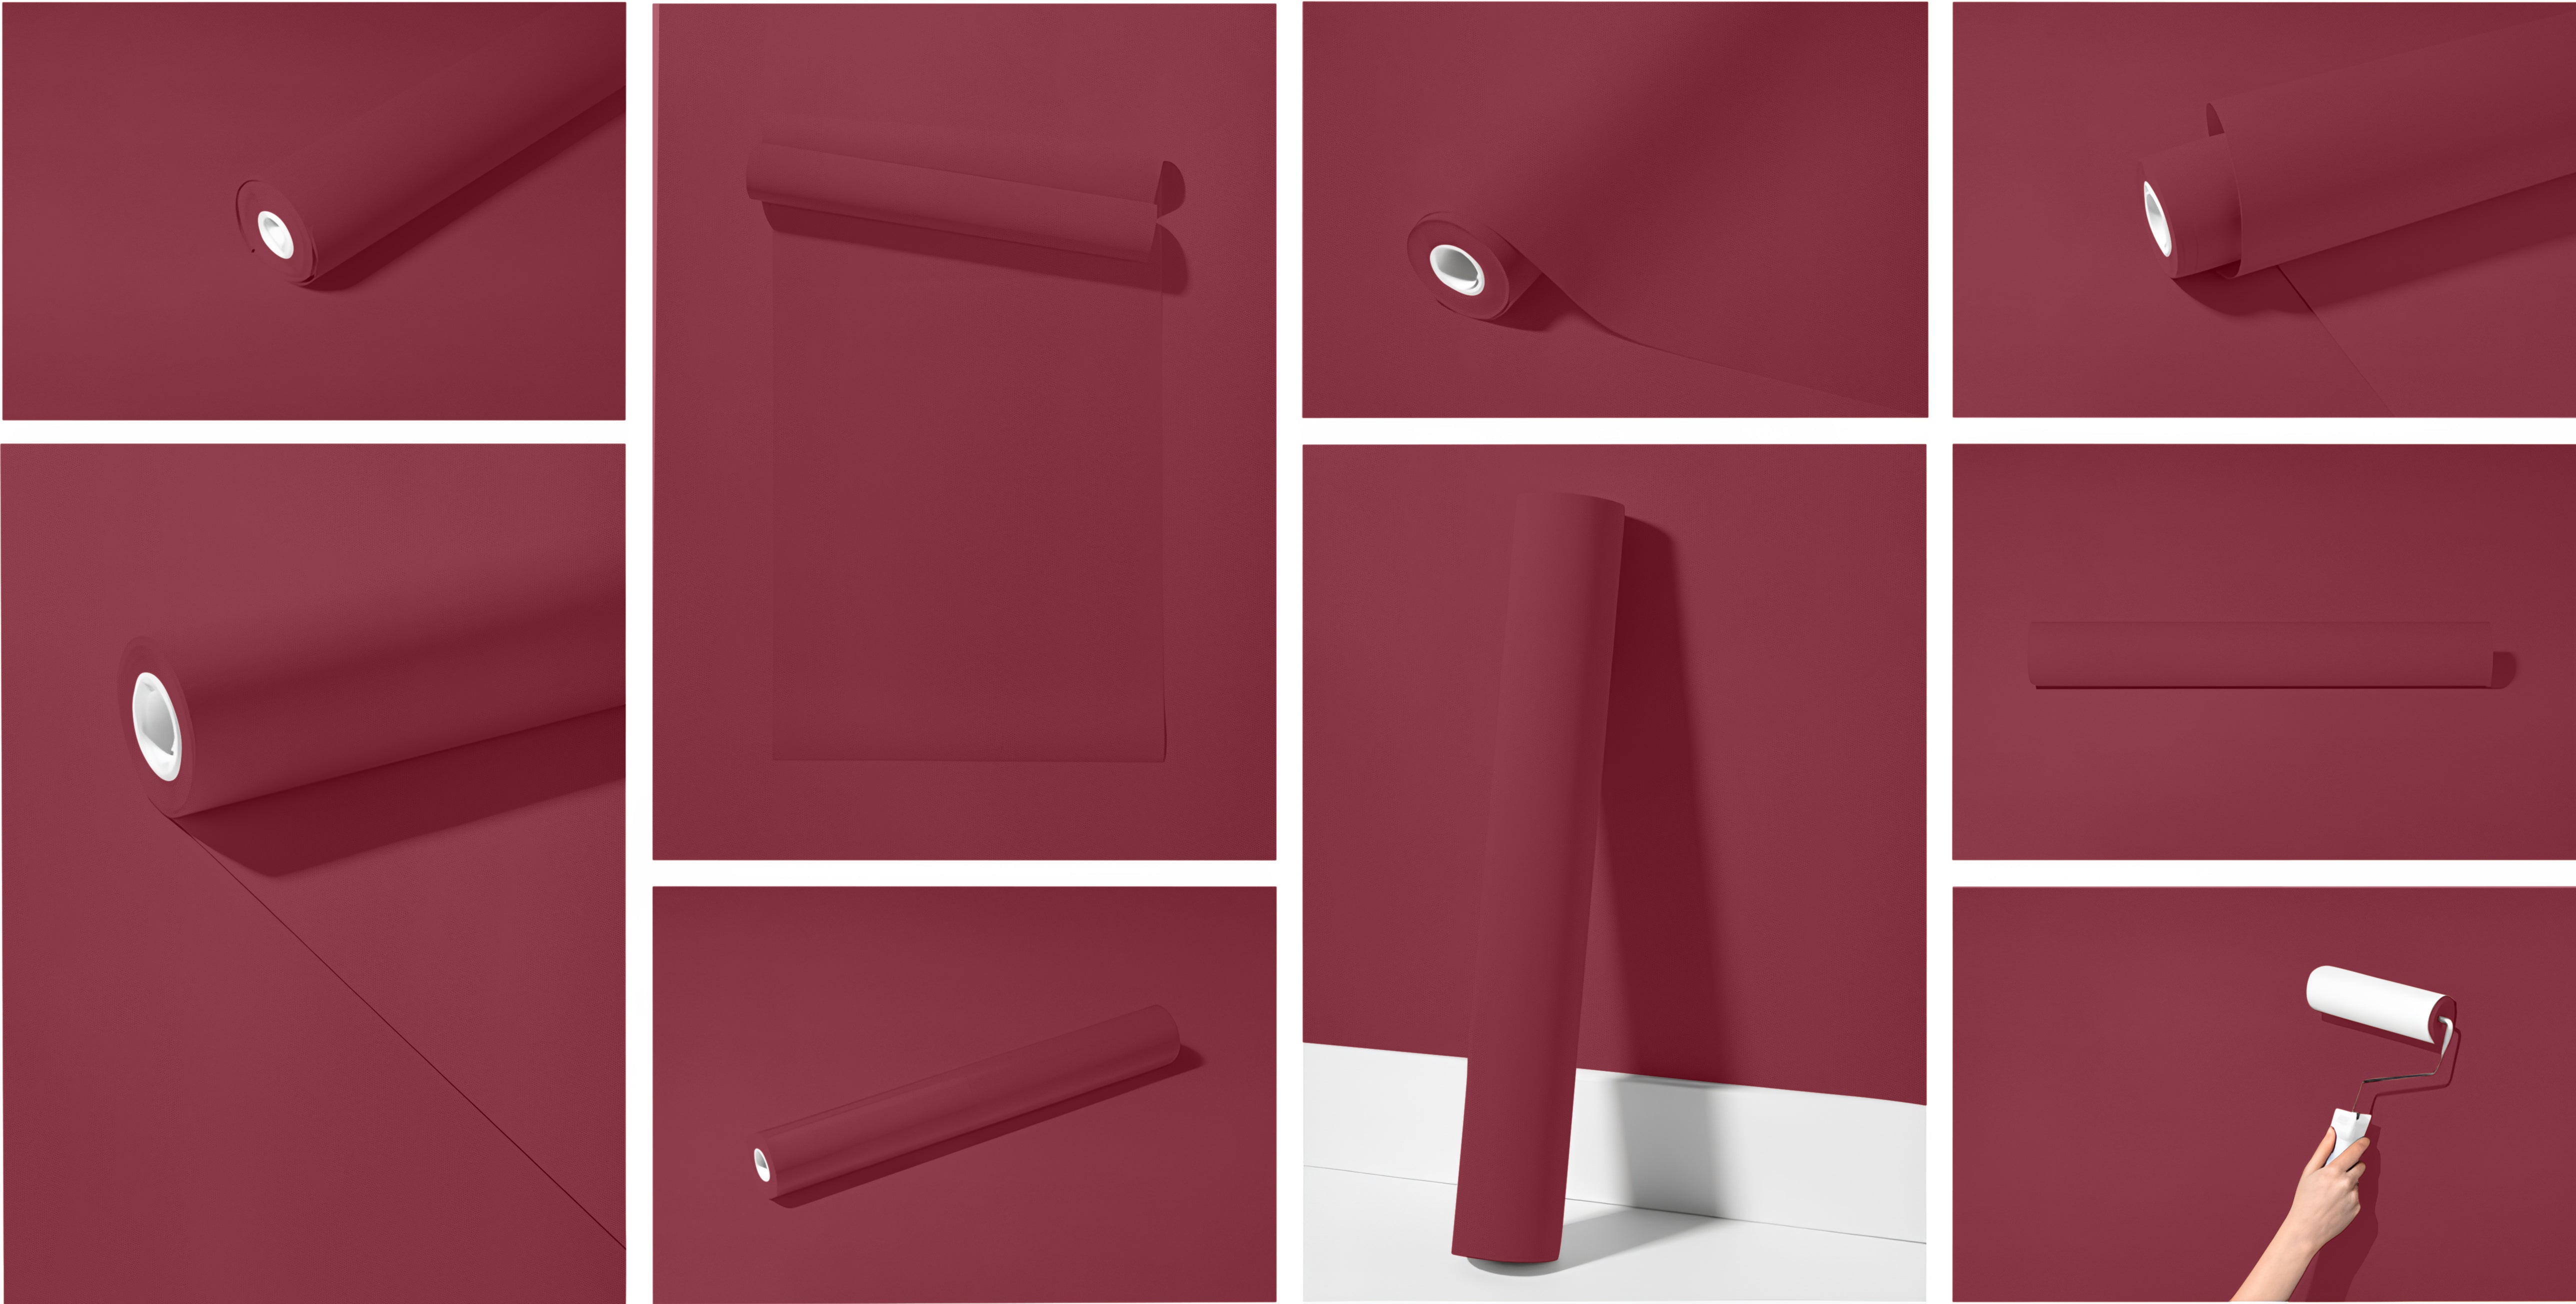 Peel & Stick Removable Re-usable Paint - Color RAL 4002 Red Violet - offRAL™ - RALRAW LLC, USA